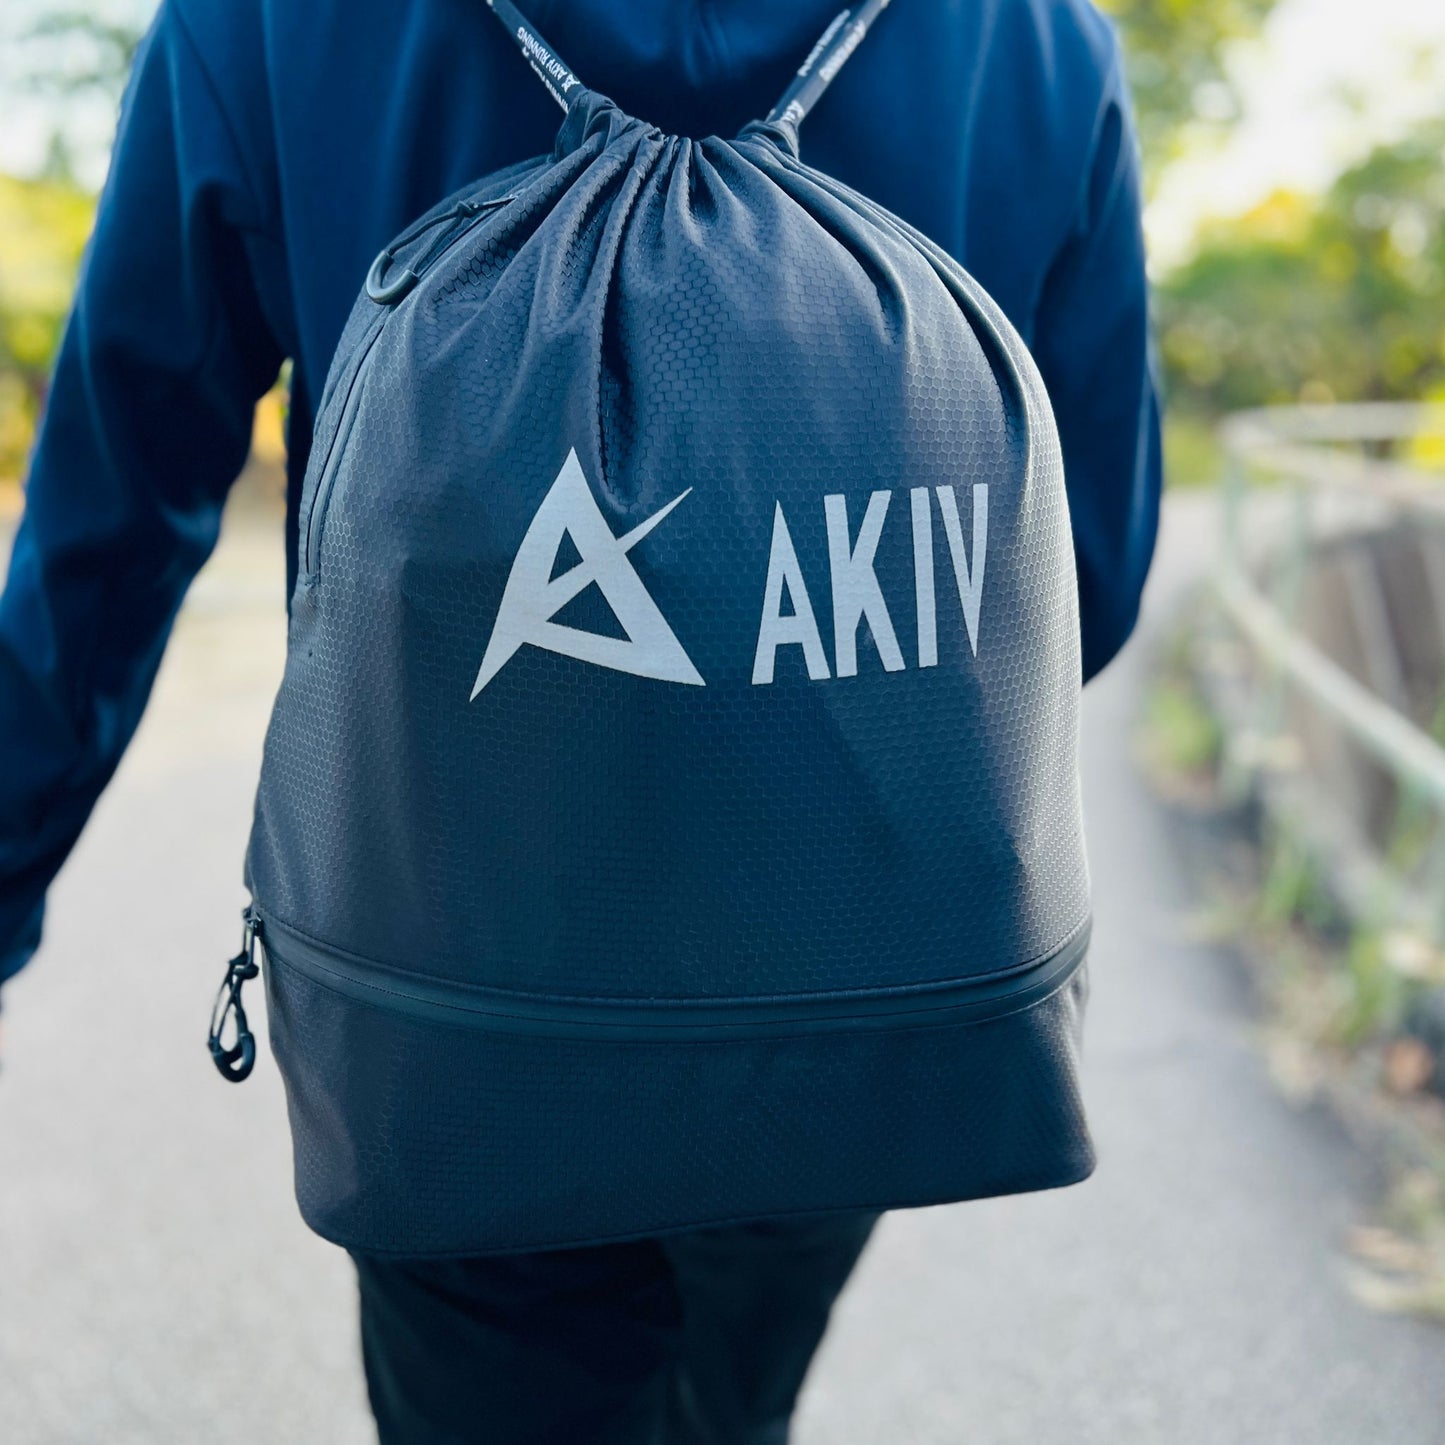 【GIFT】AKIV Waterproof Drawstring Backpack - 2nd Generation (Black and White) (Purchase over HK$799 can get one gift)